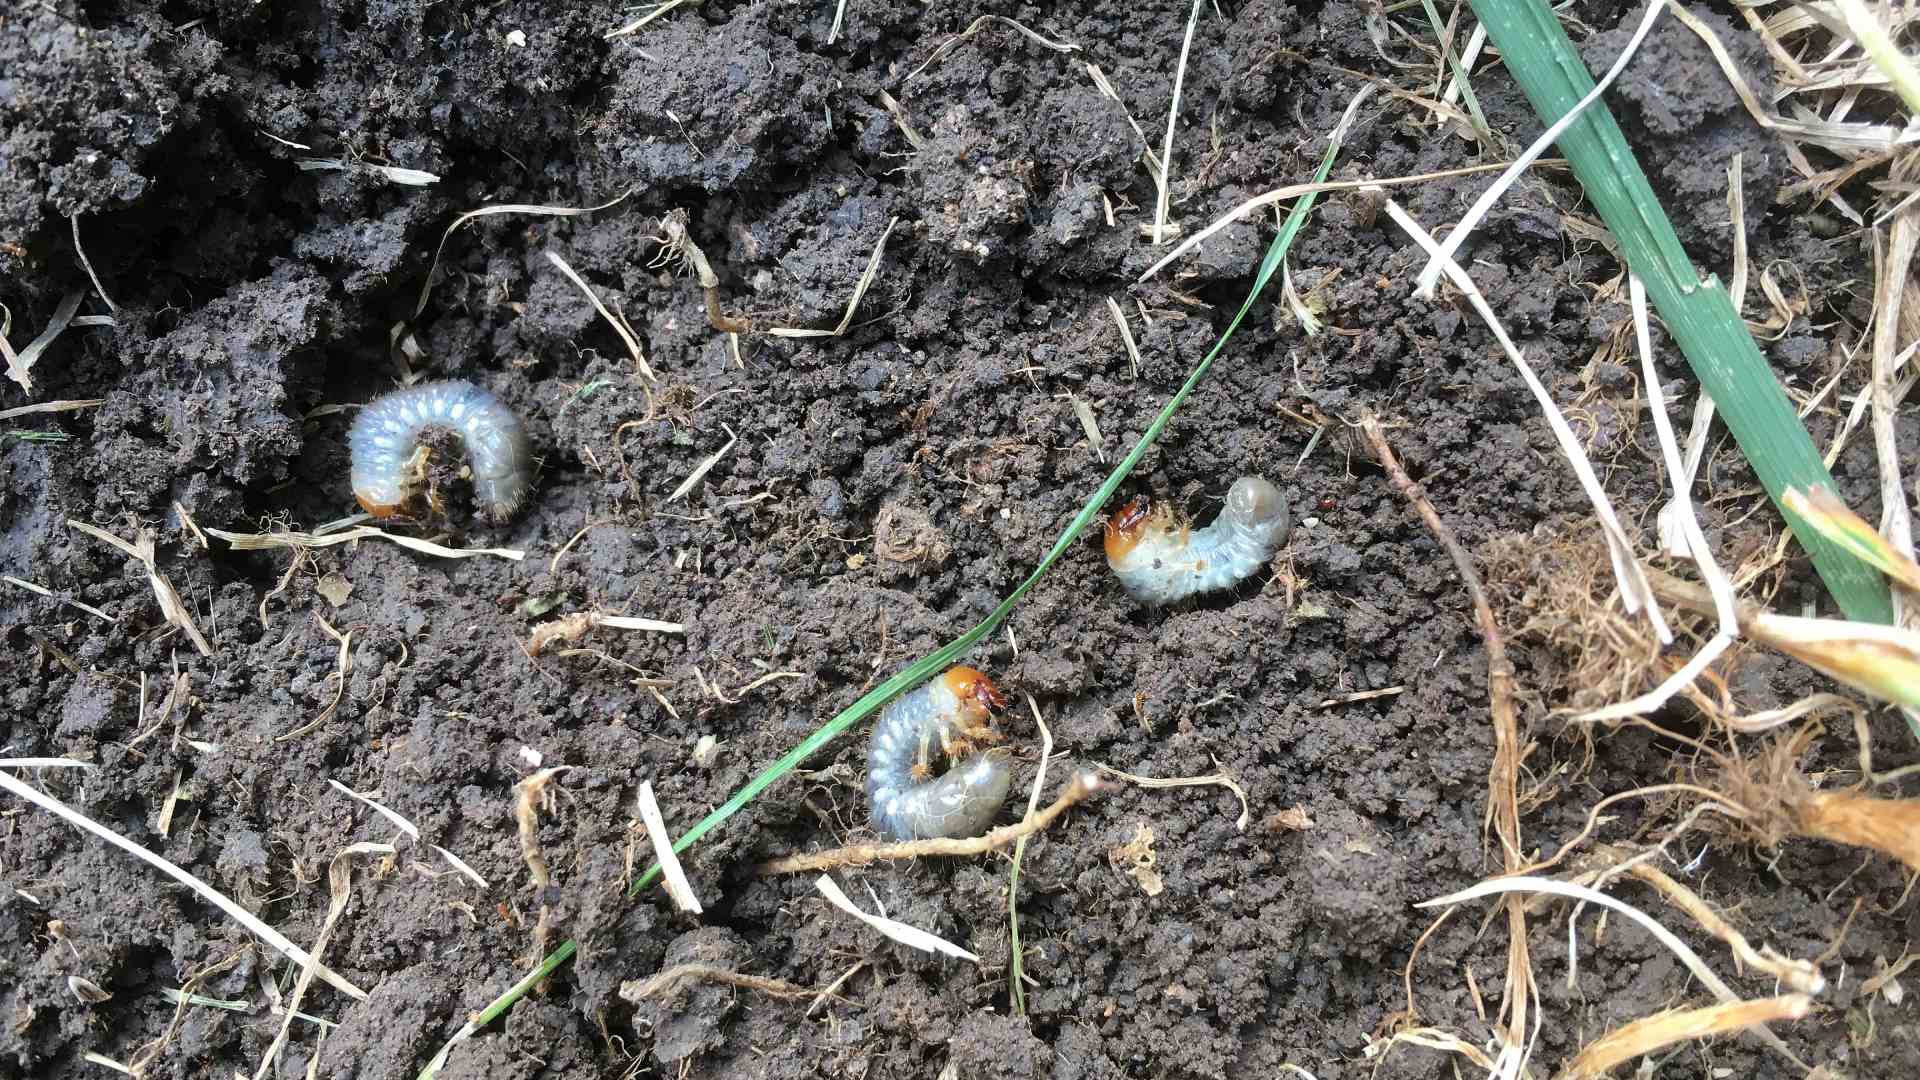 Grubs found in soil under grass top level in Telford, PA.